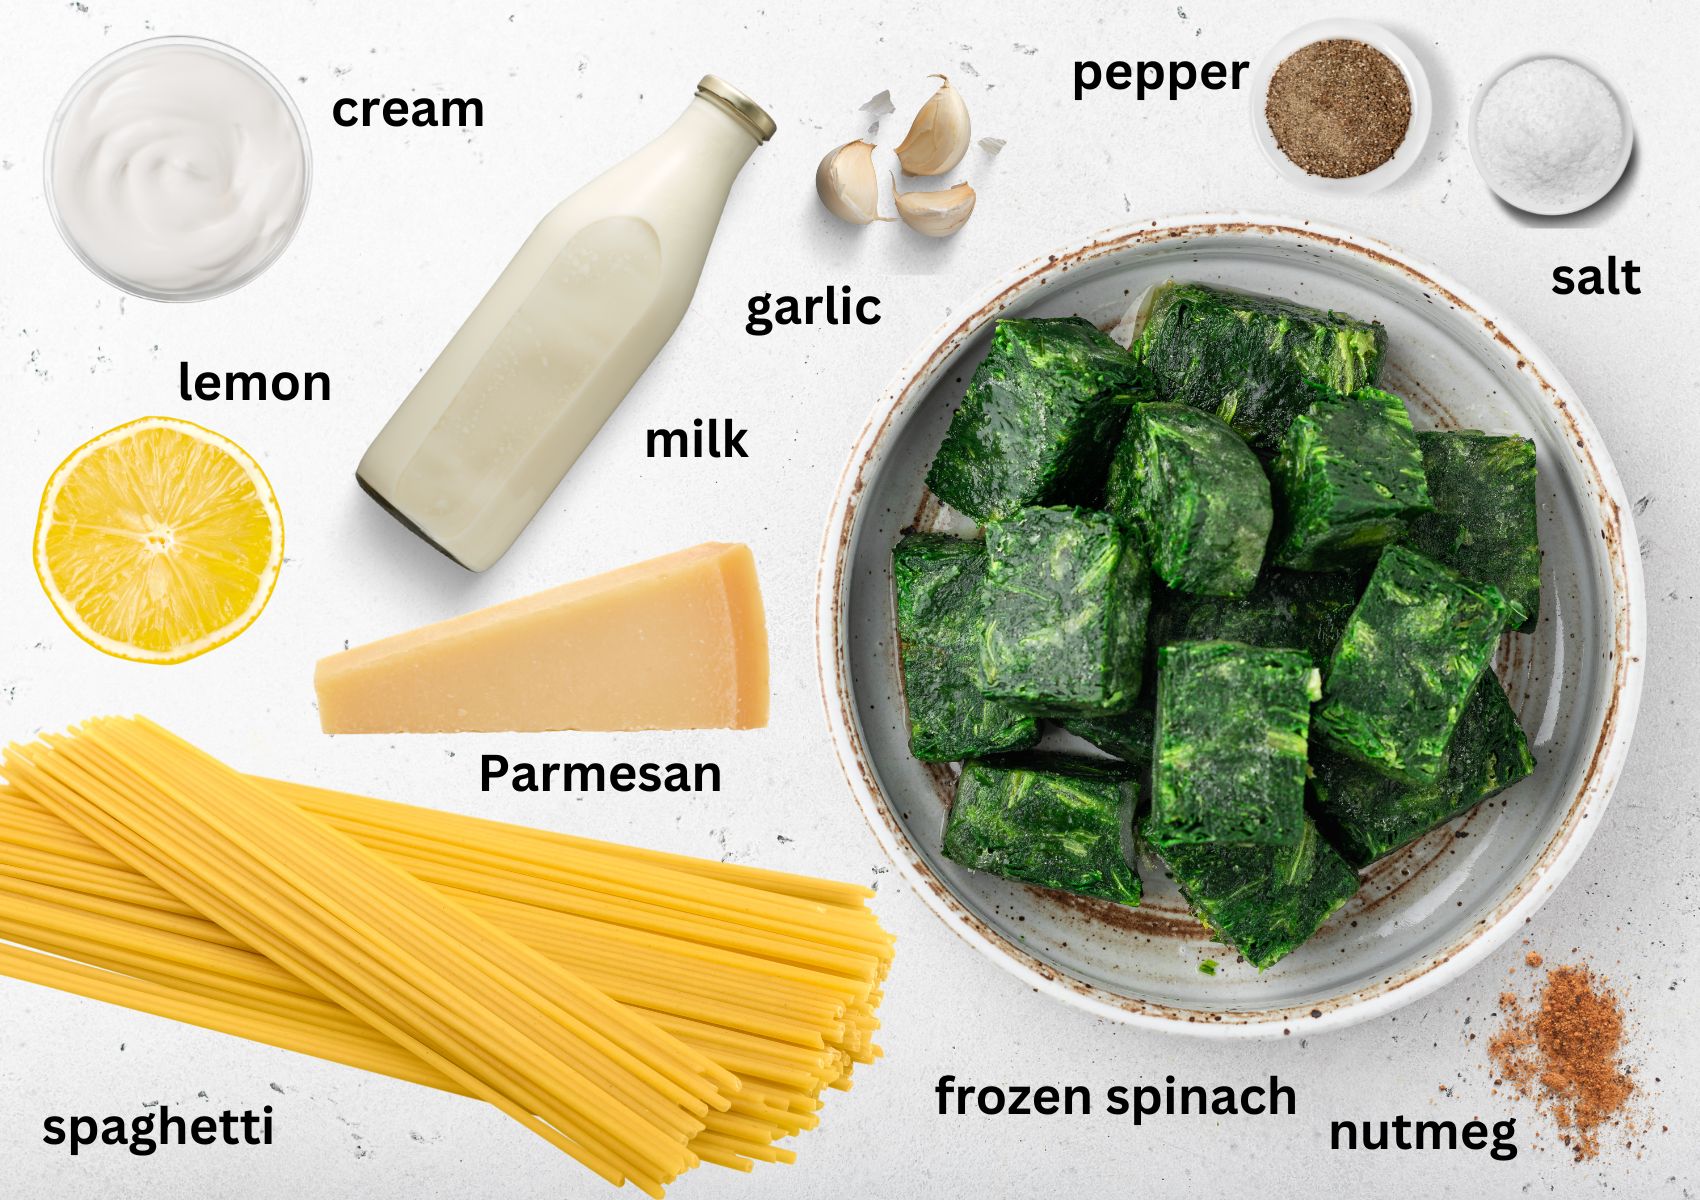 labeled ingredients for making pasta with frozen spinach, parmean, and cream.